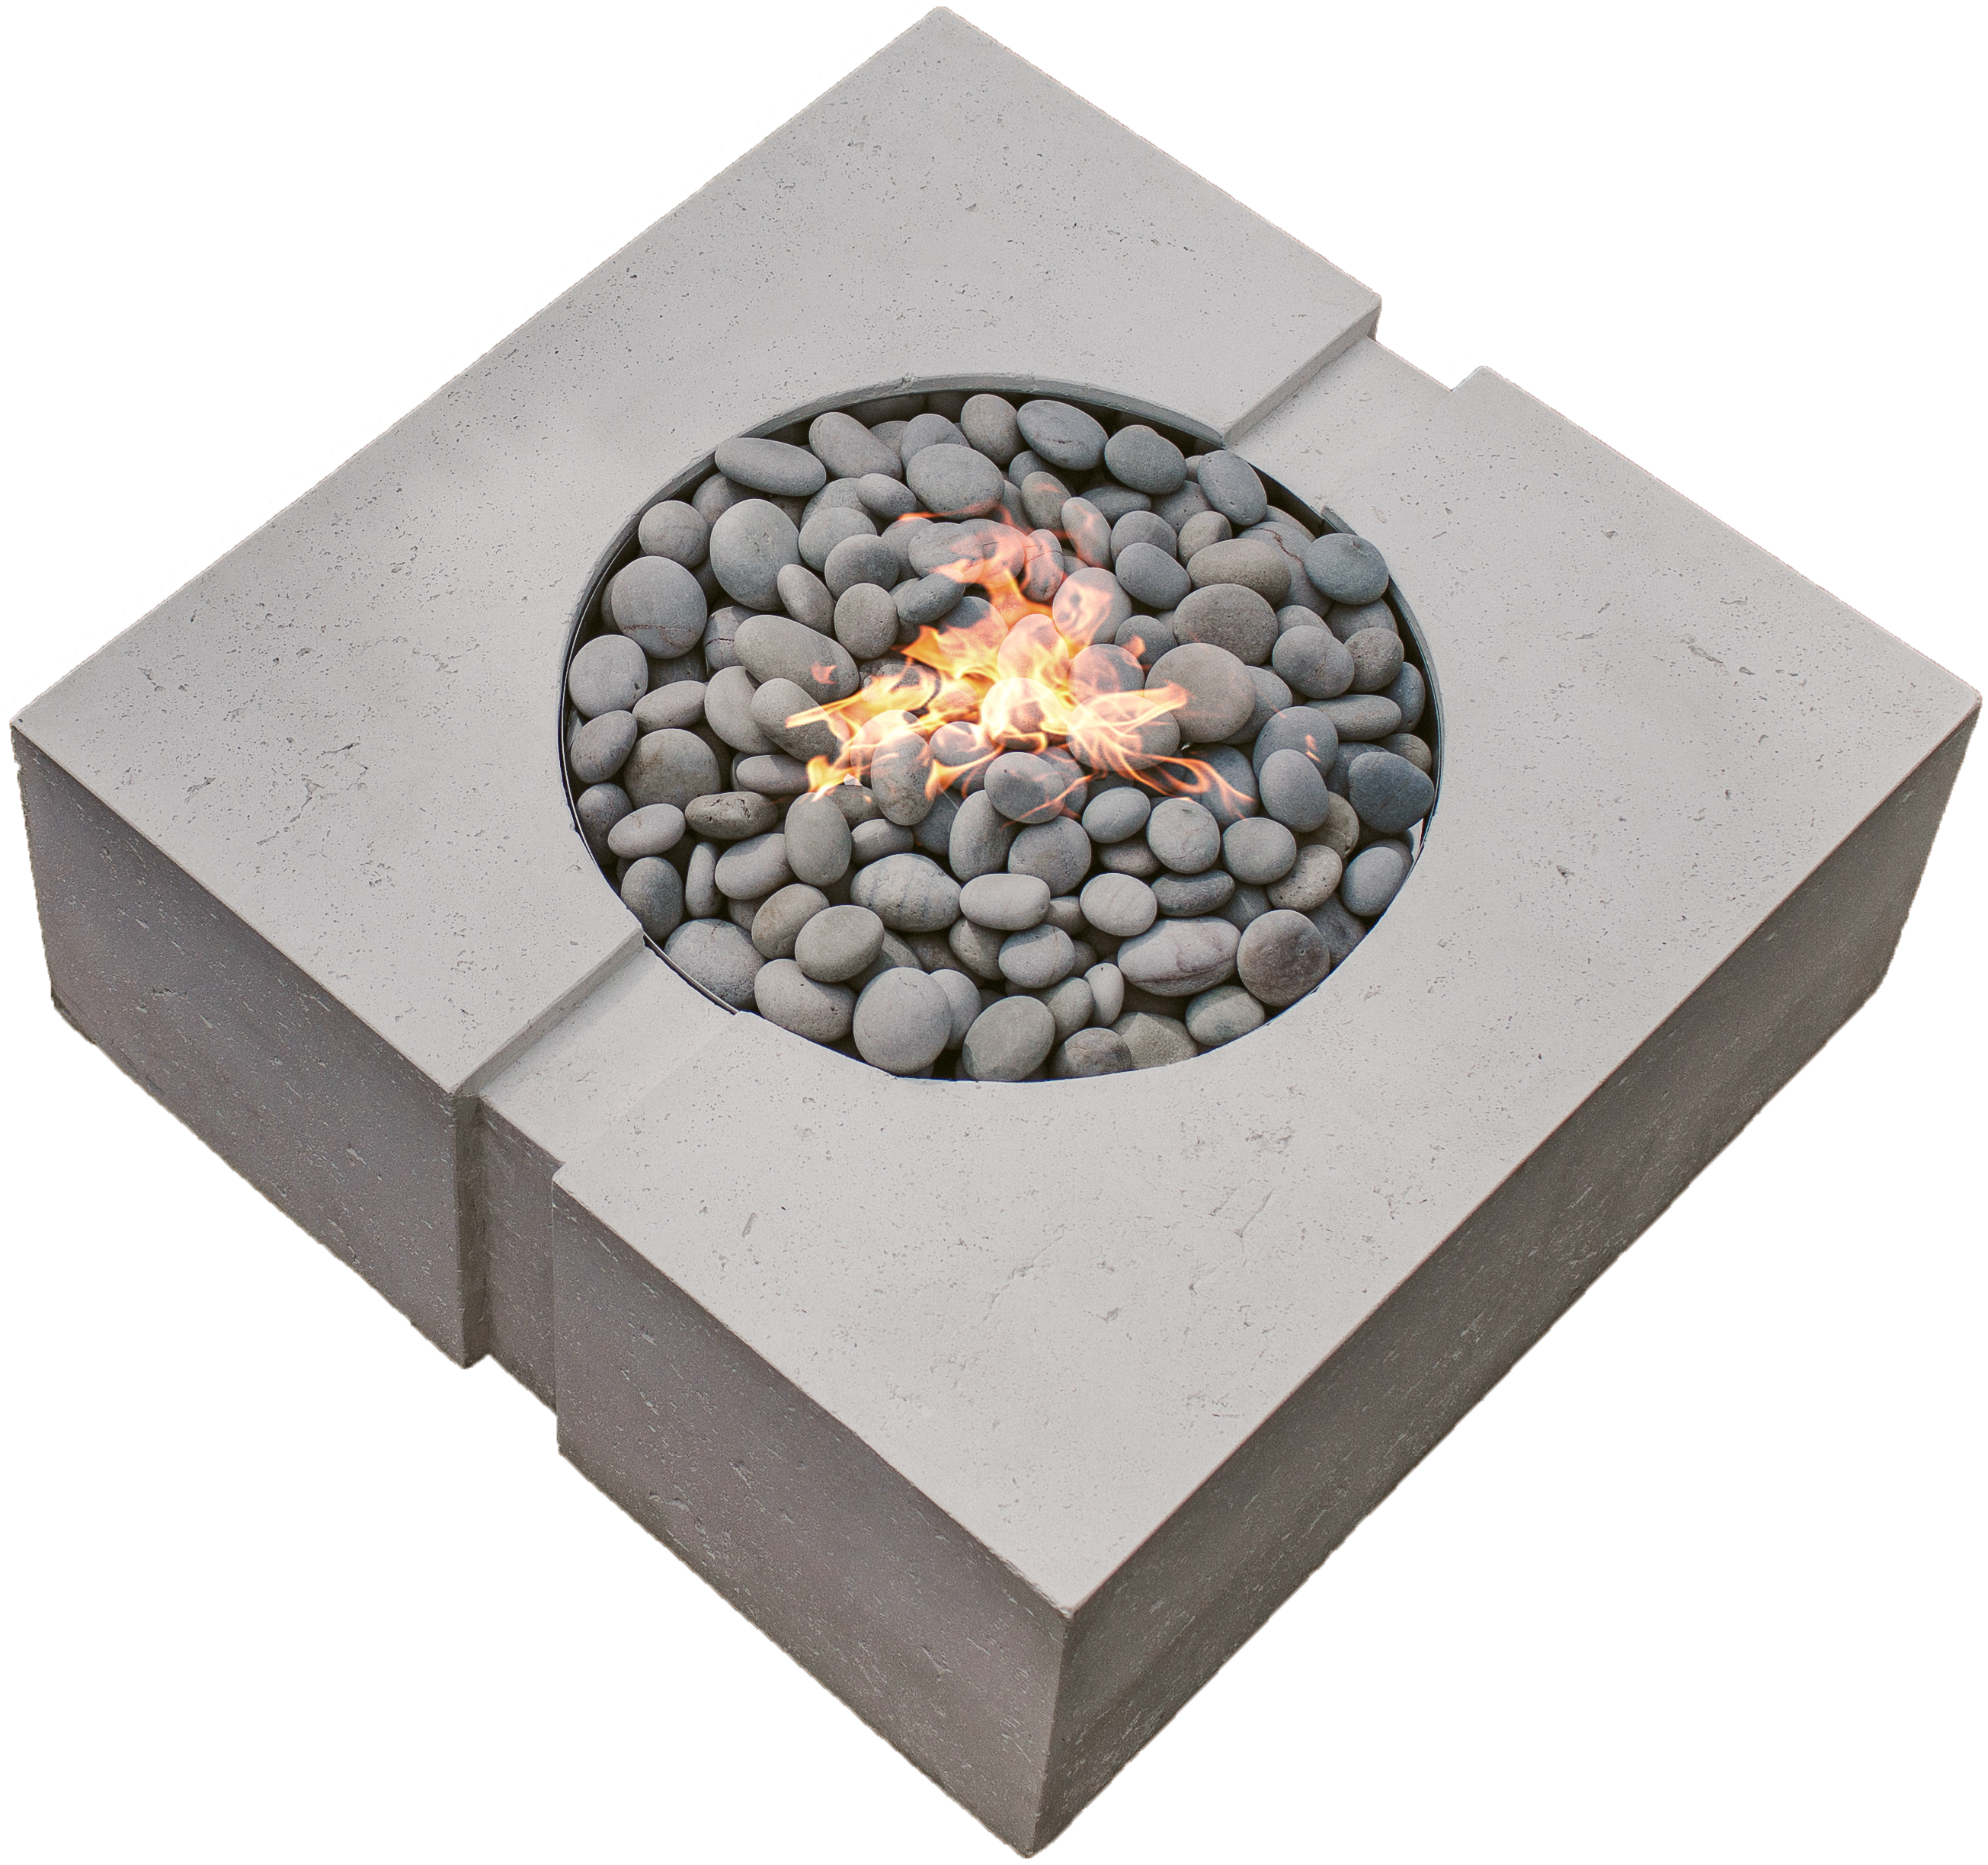 A Fire Pit With Rocks In It